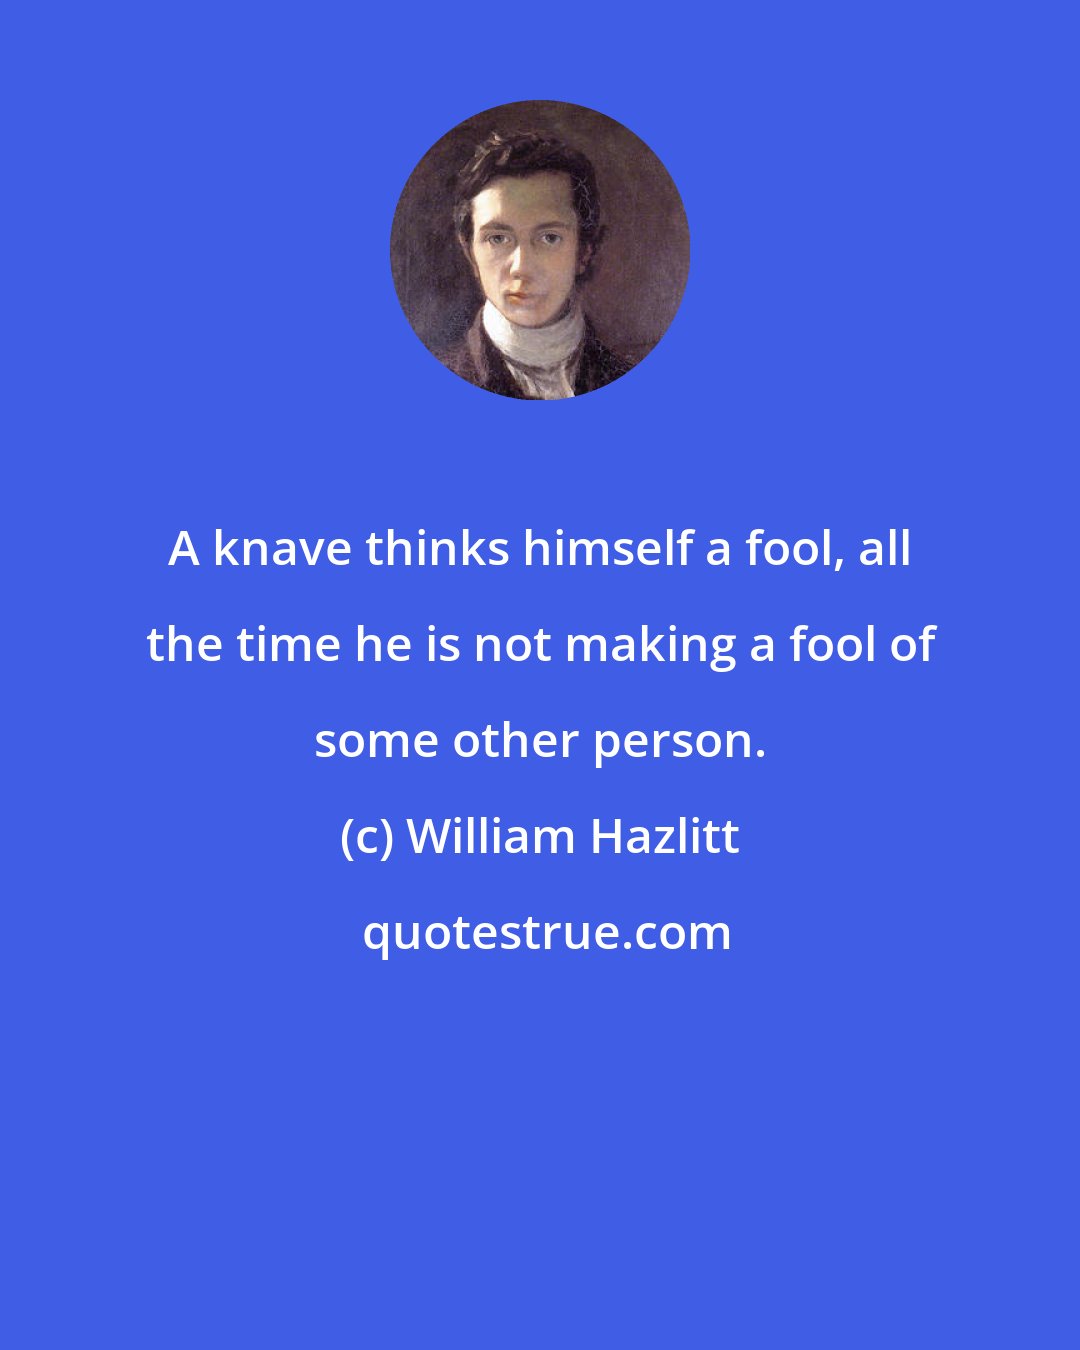 William Hazlitt: A knave thinks himself a fool, all the time he is not making a fool of some other person.